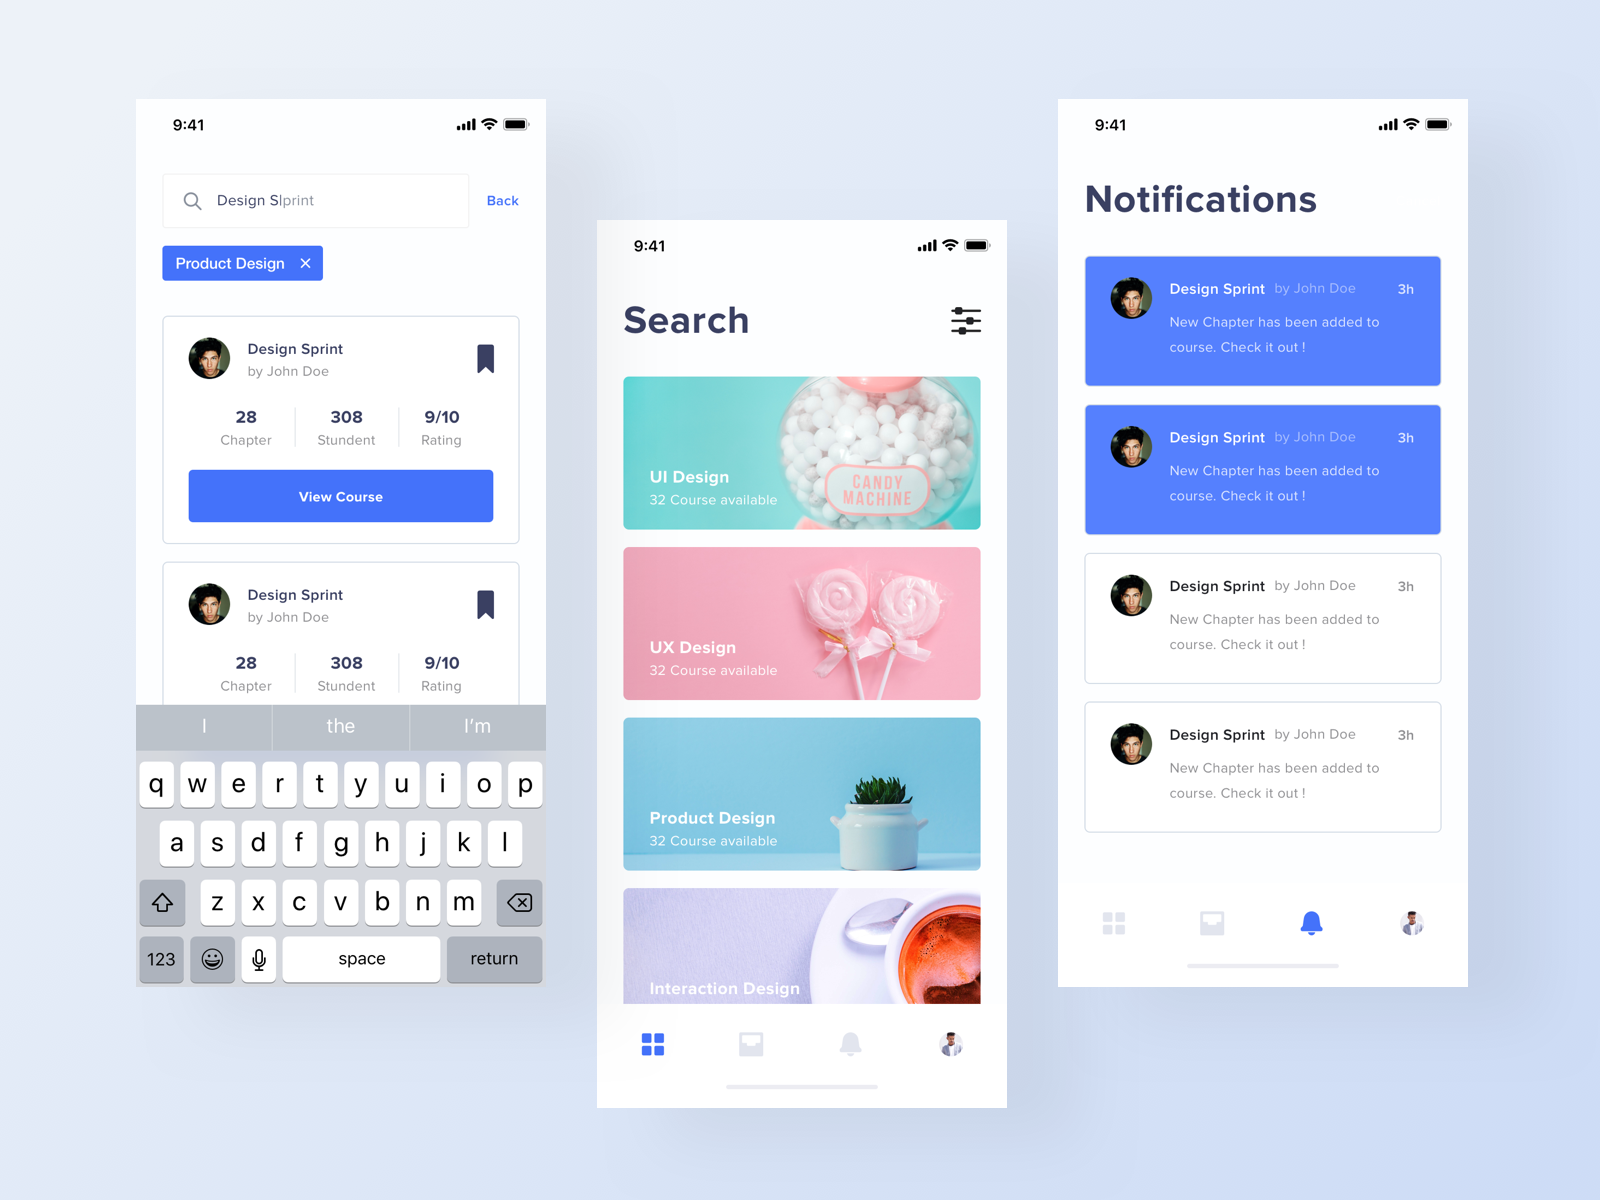 Online Course App by Nicholaus Gilang on Dribbble